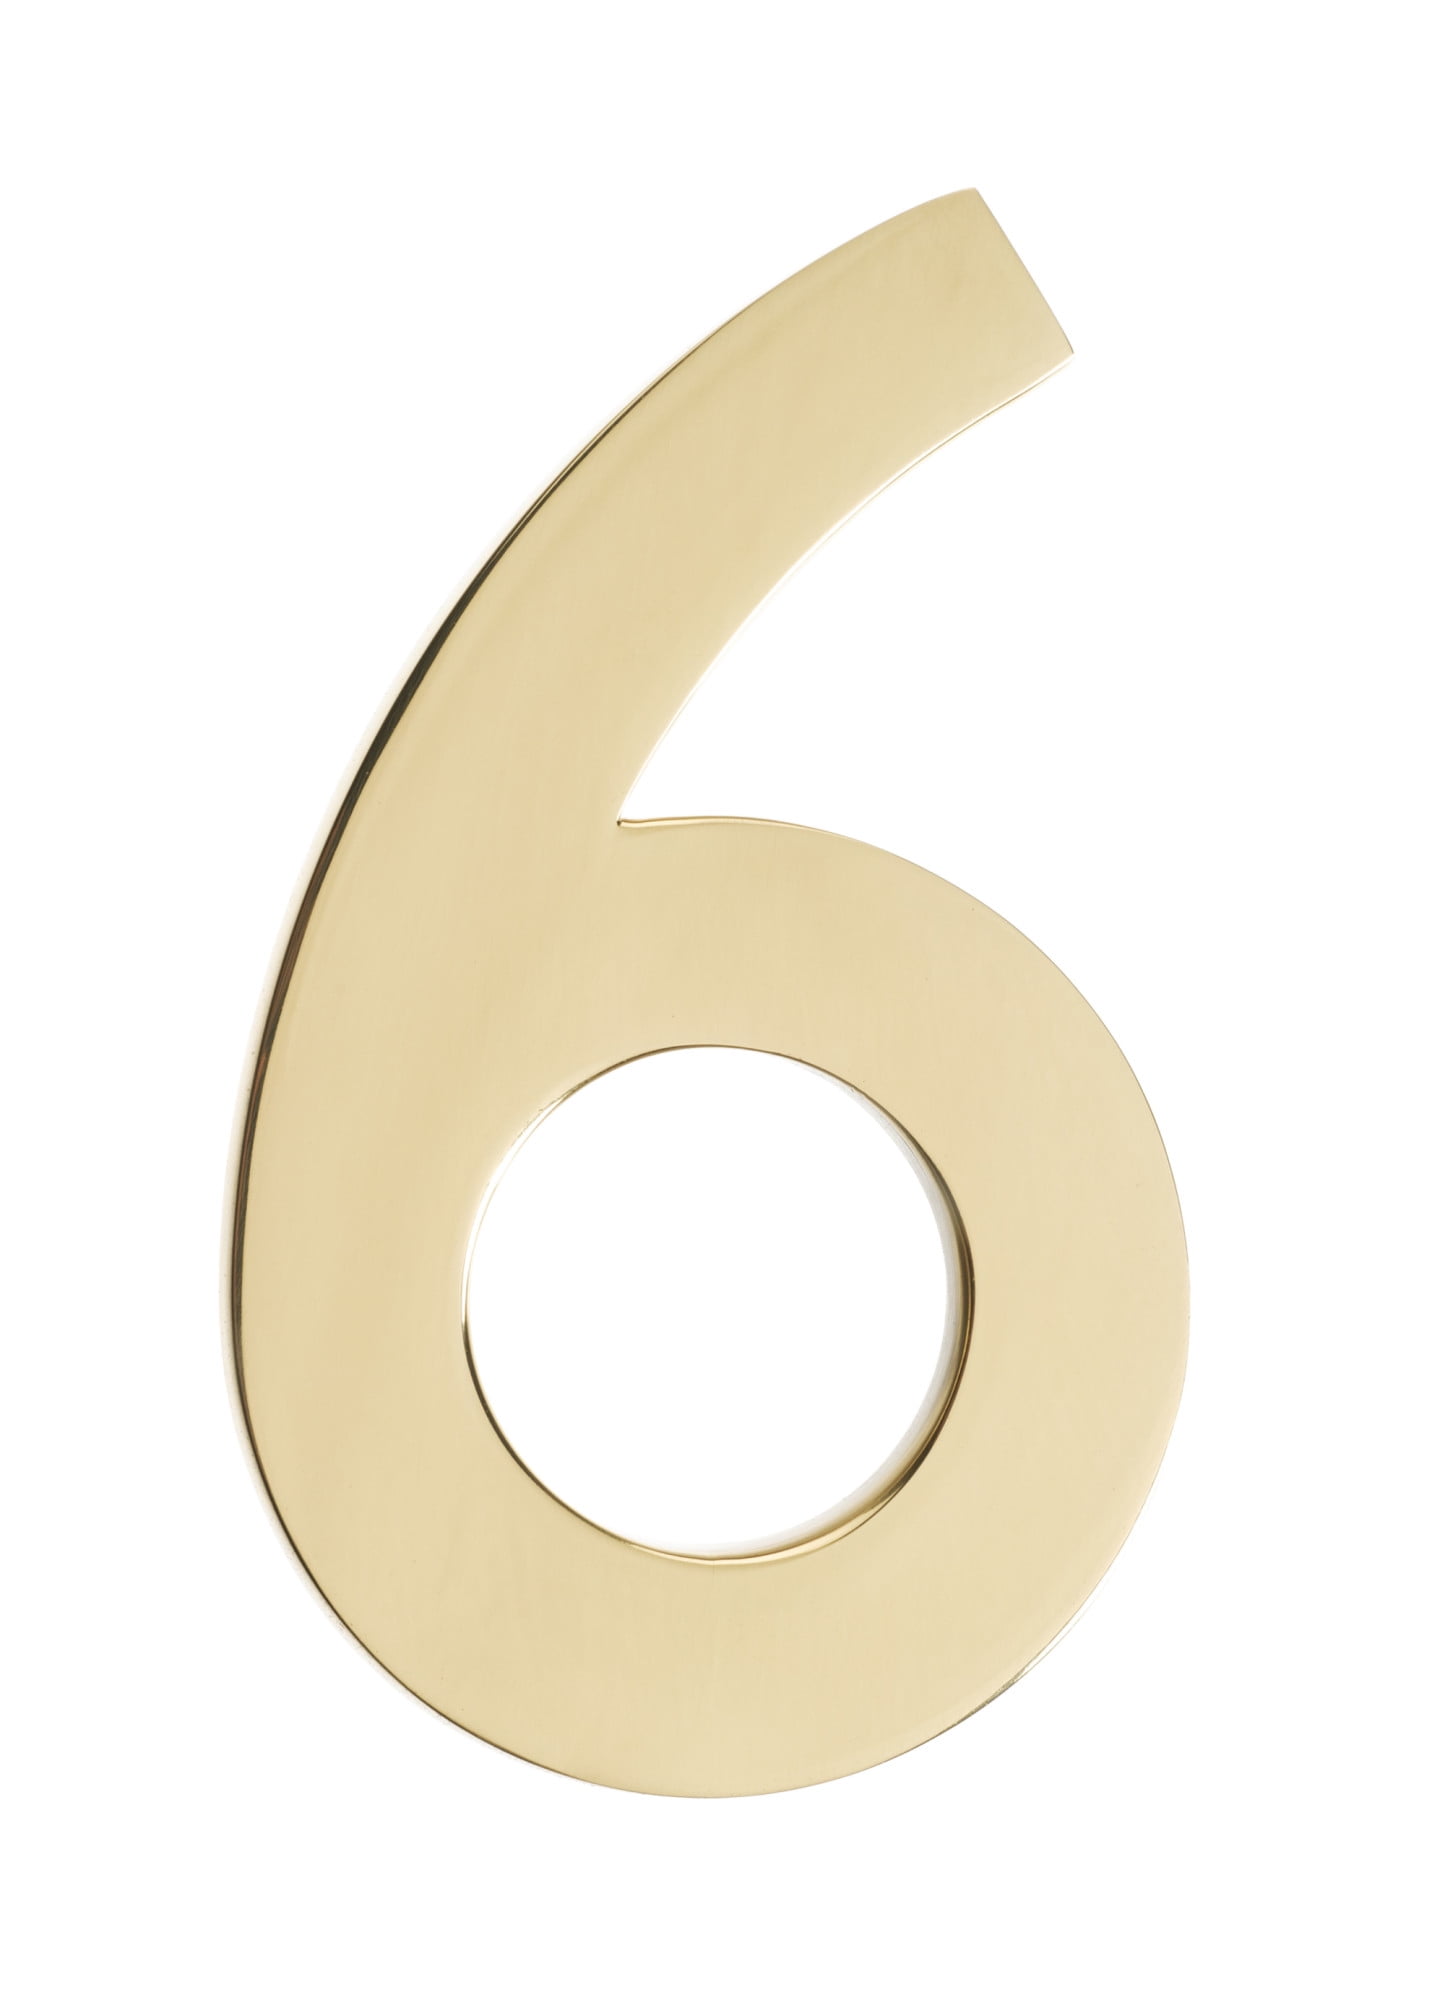 3585pb-6 House Number 6, Polished Brass - 5 In.